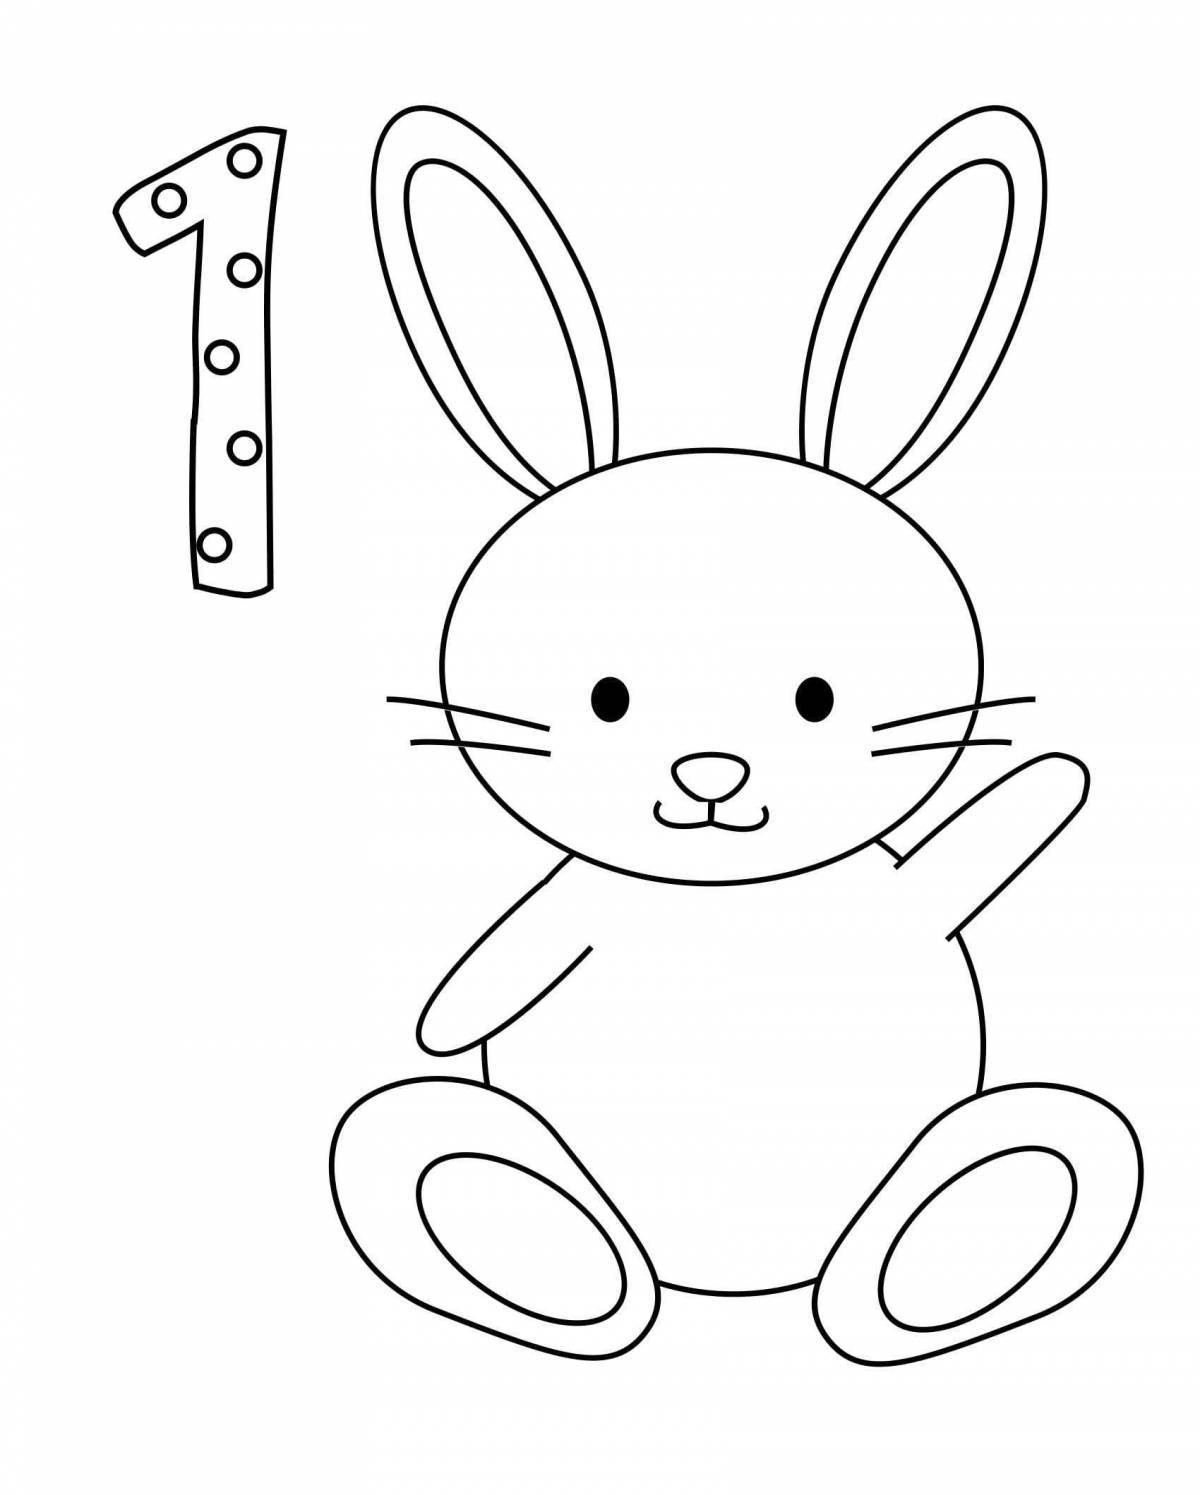 Coloring book happy hare for kids